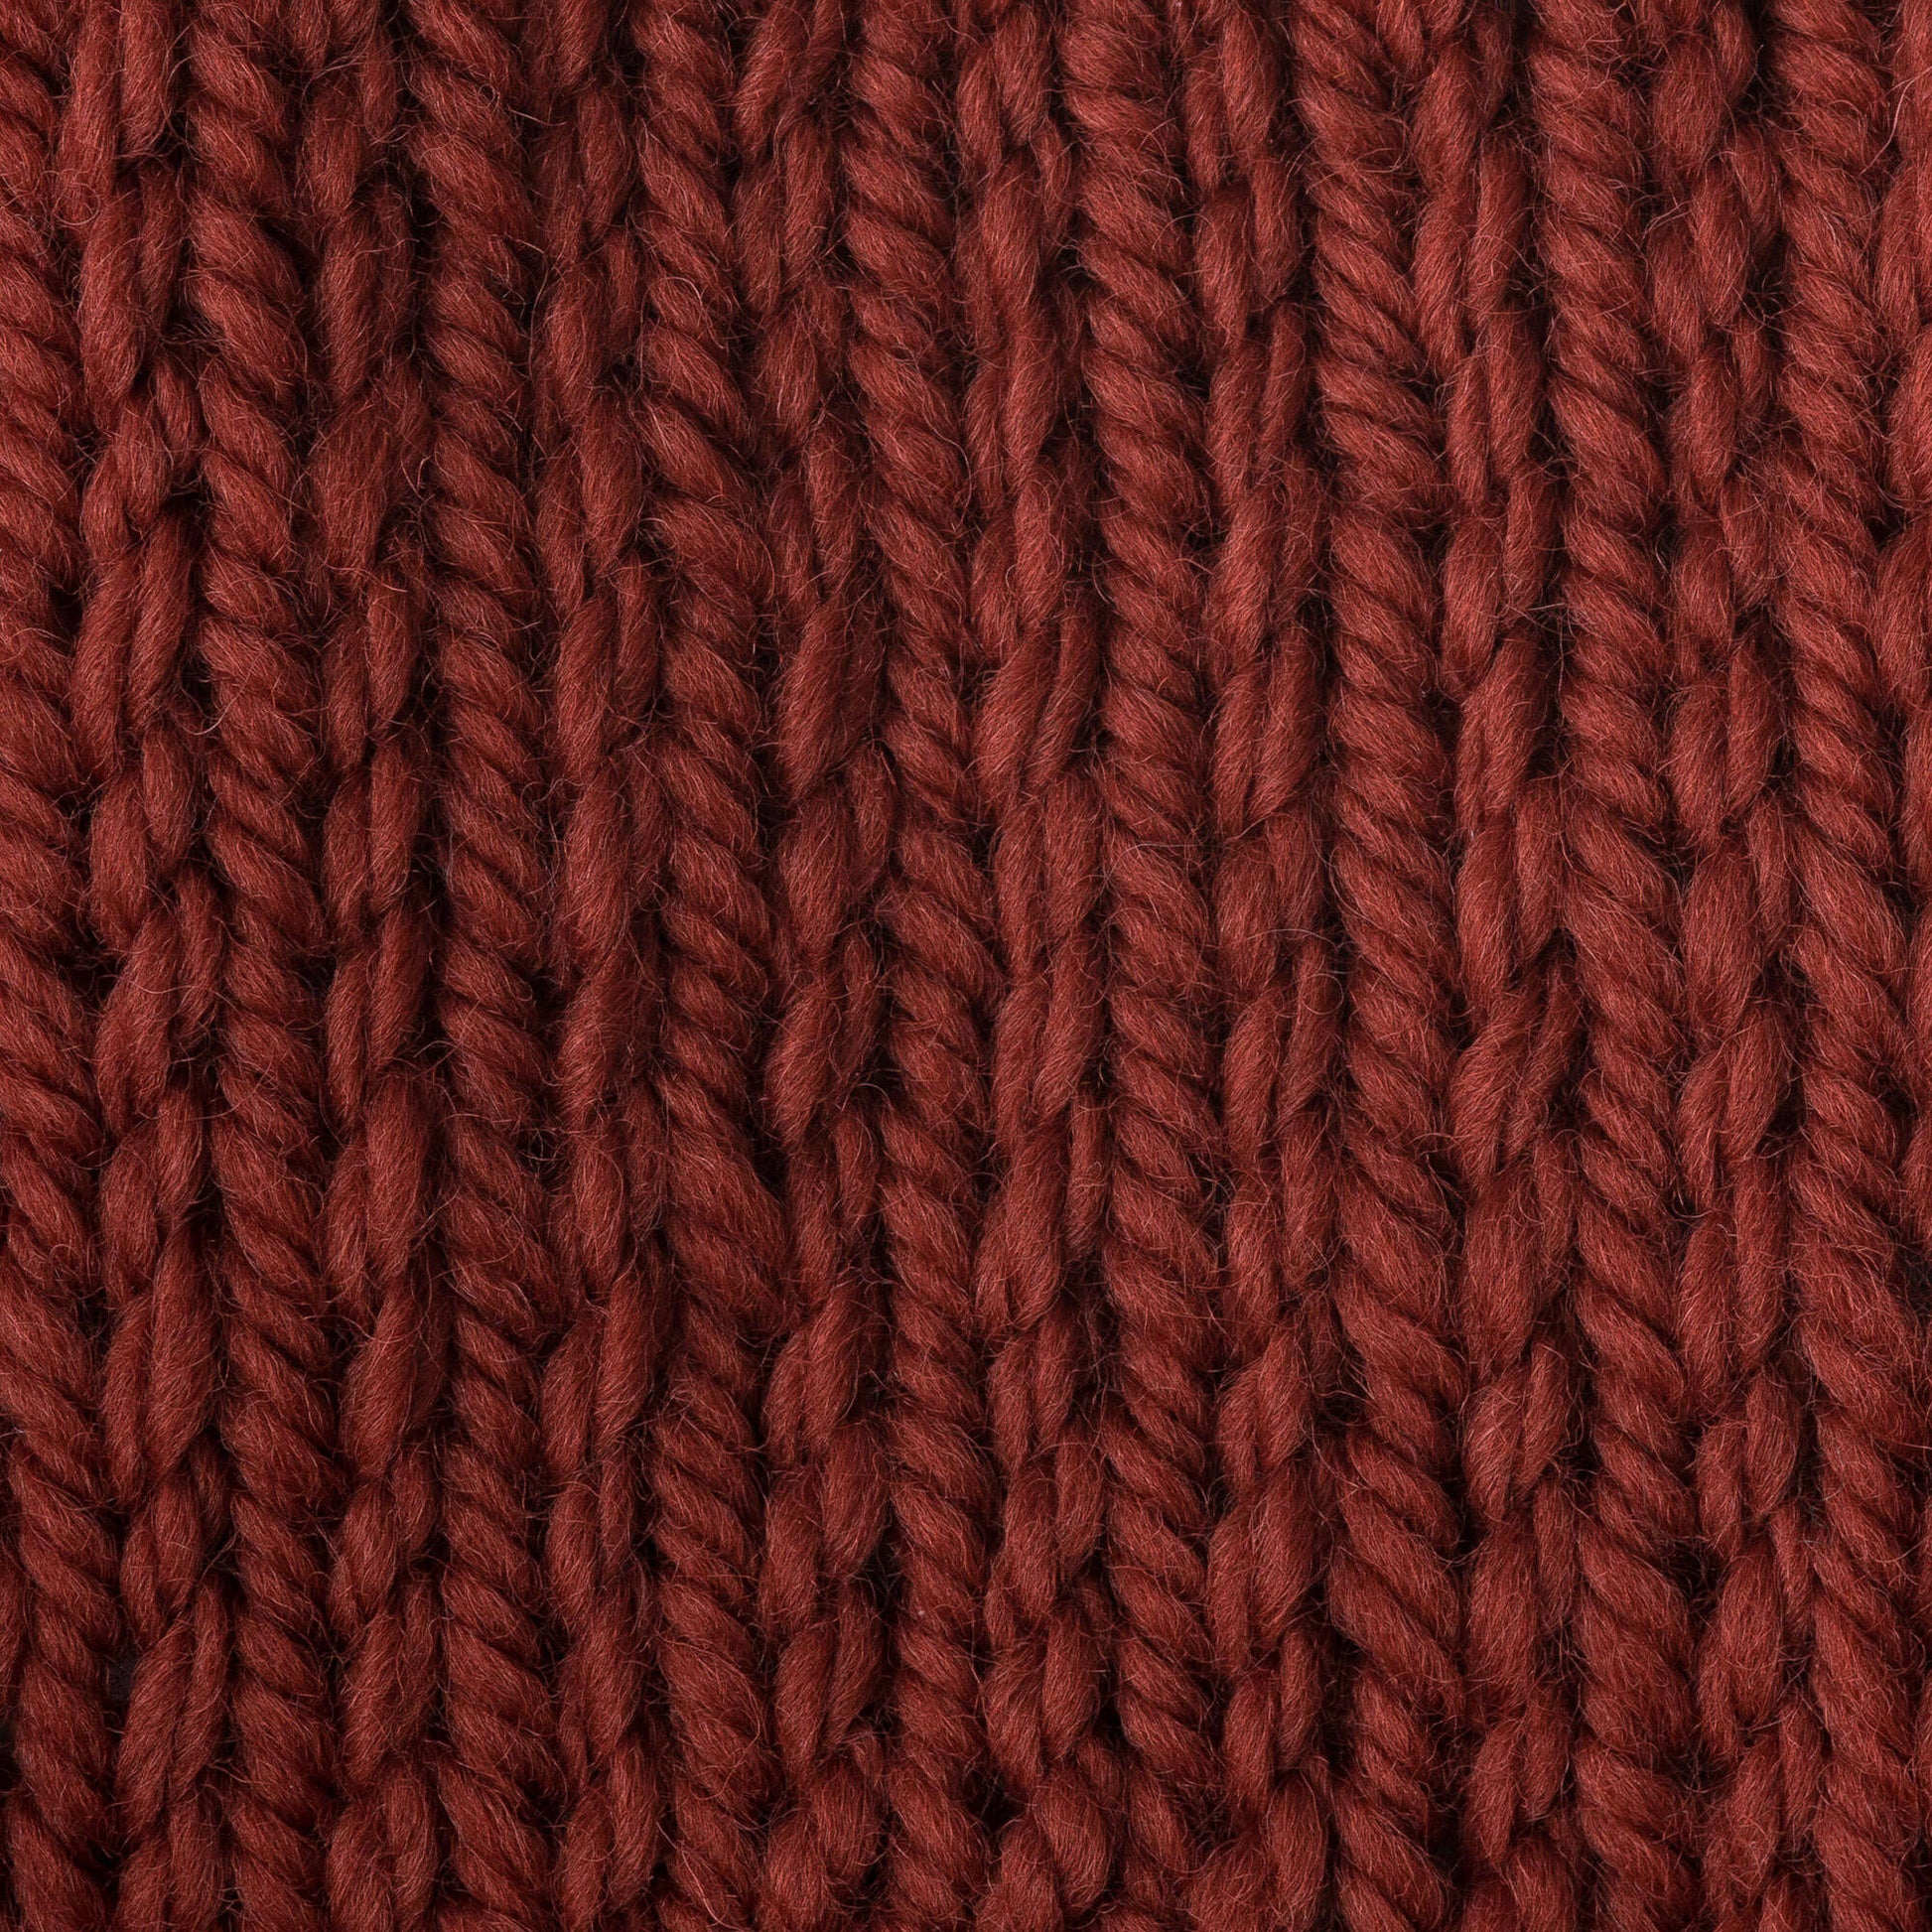 Patons Classic Wool Bulky Yarn - Discontinued Shades Vermillion Red